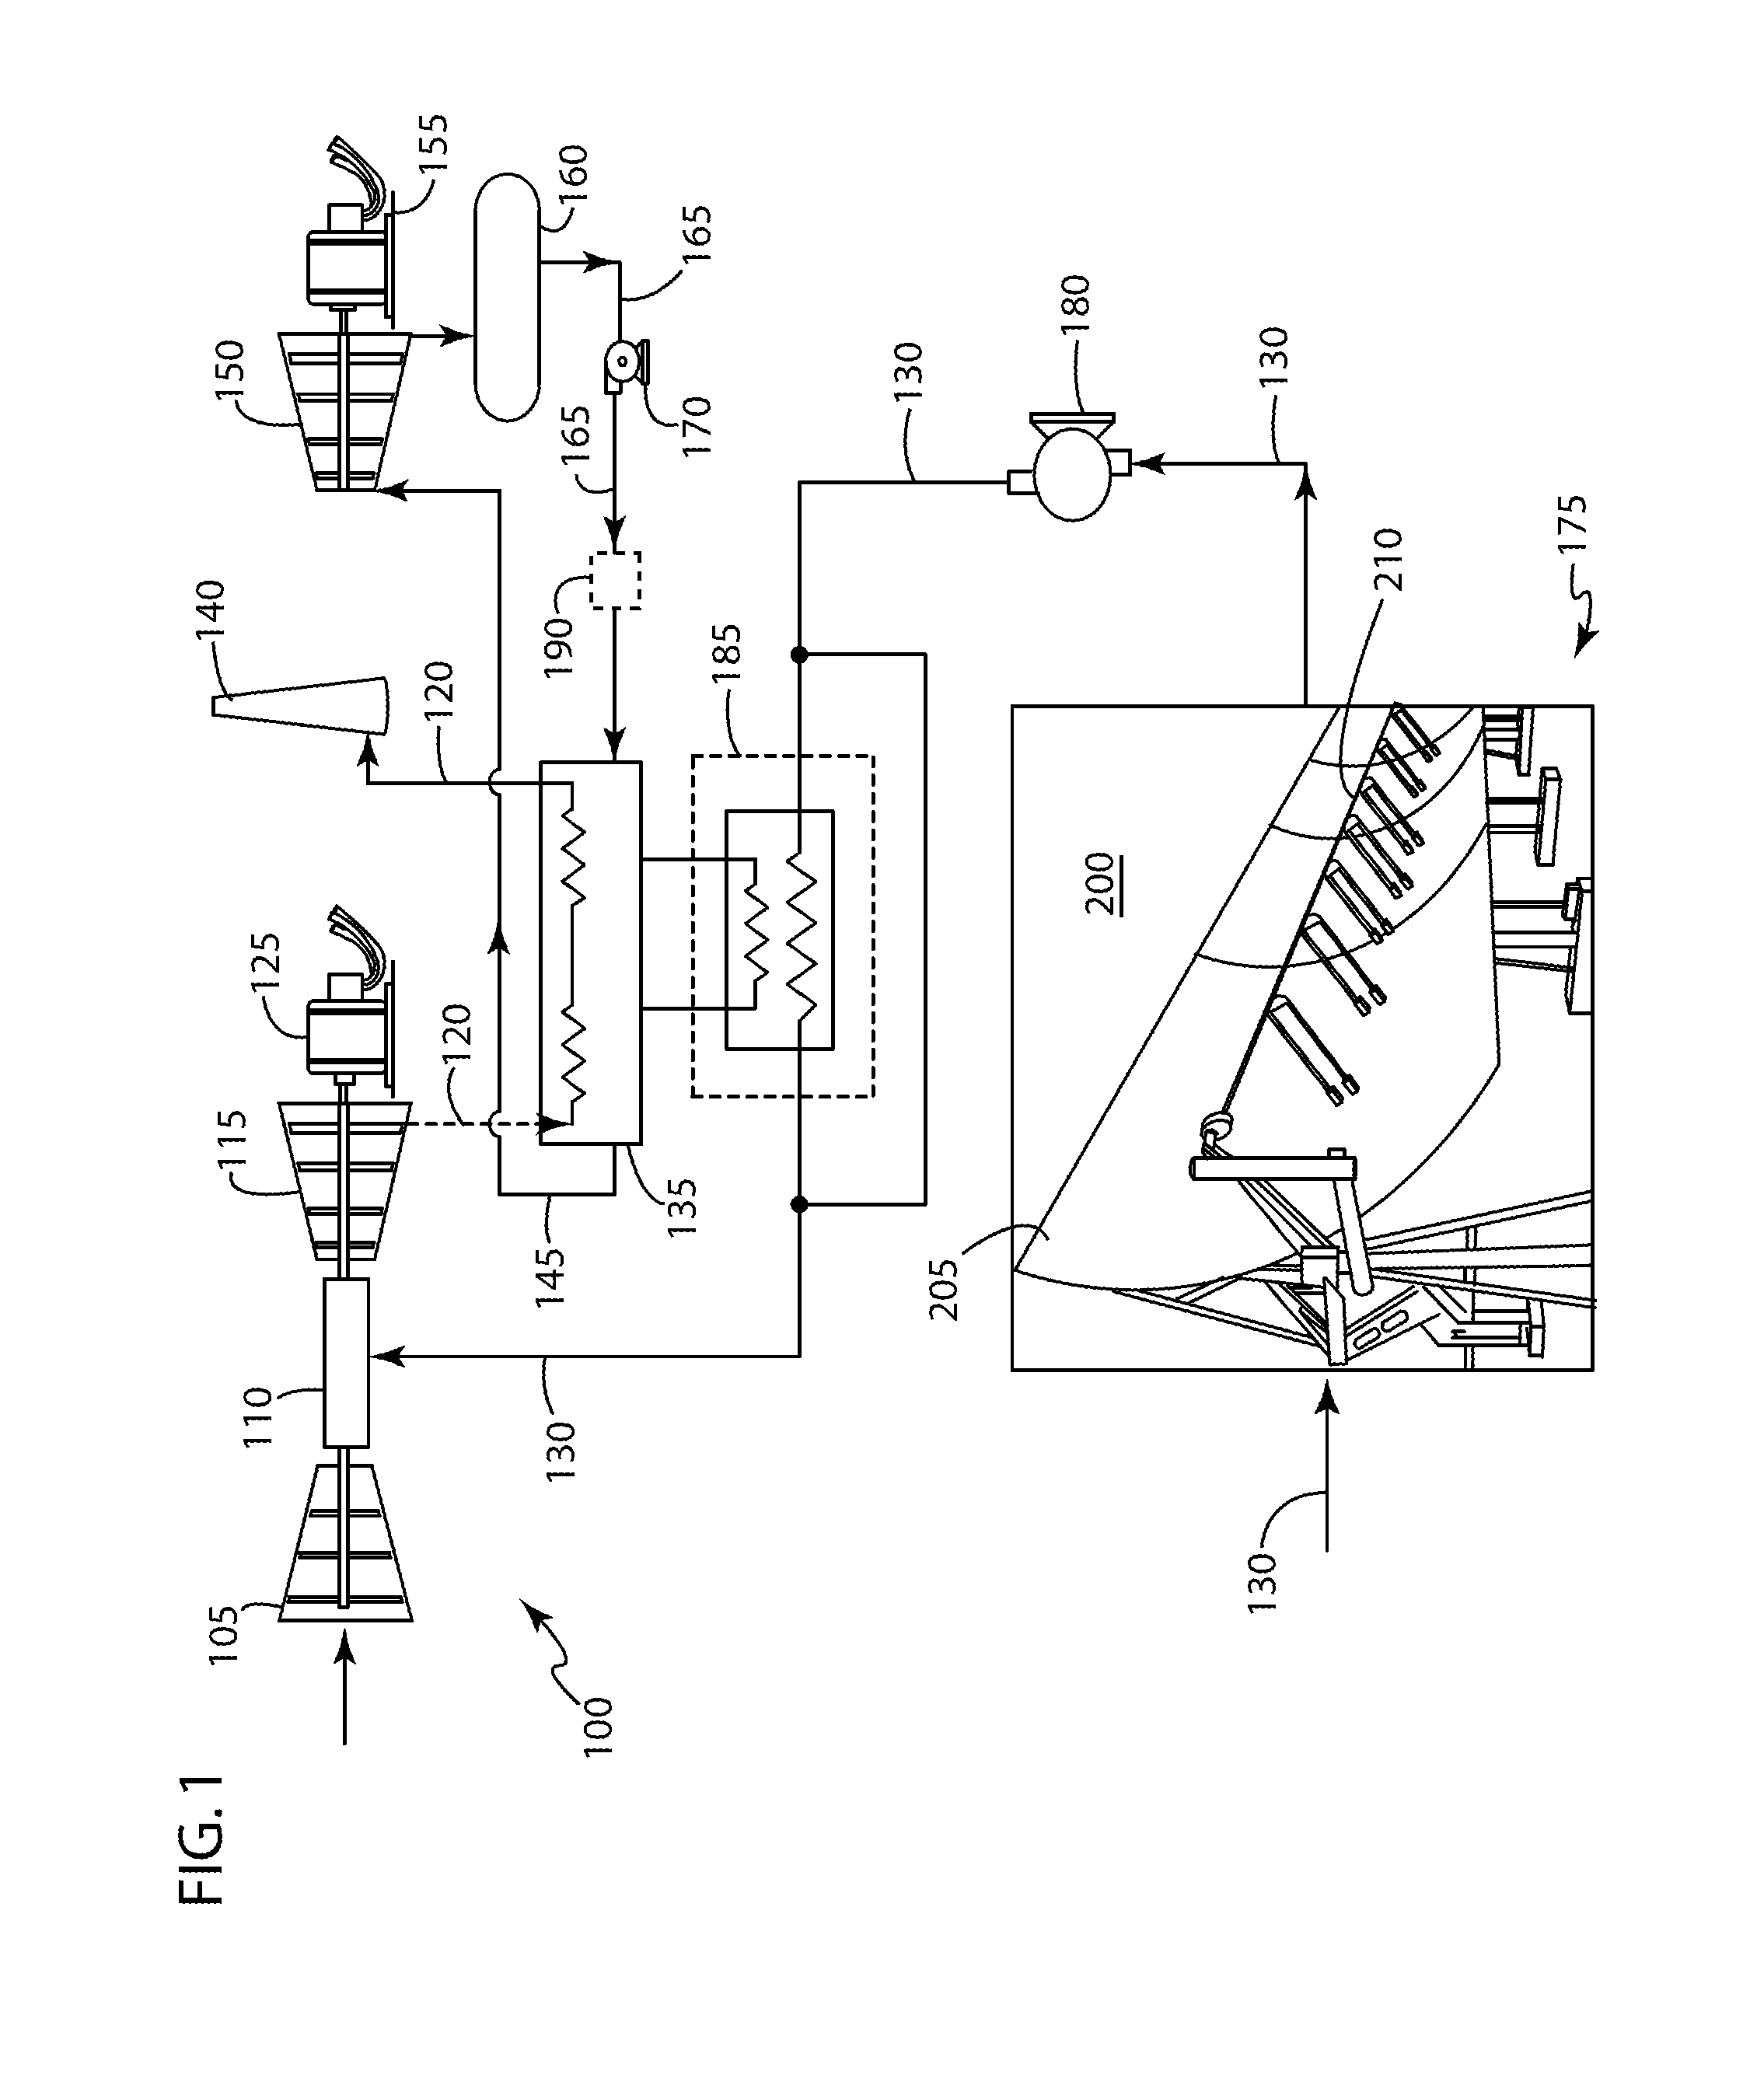 System and method for heating a fuel using a solar heating system